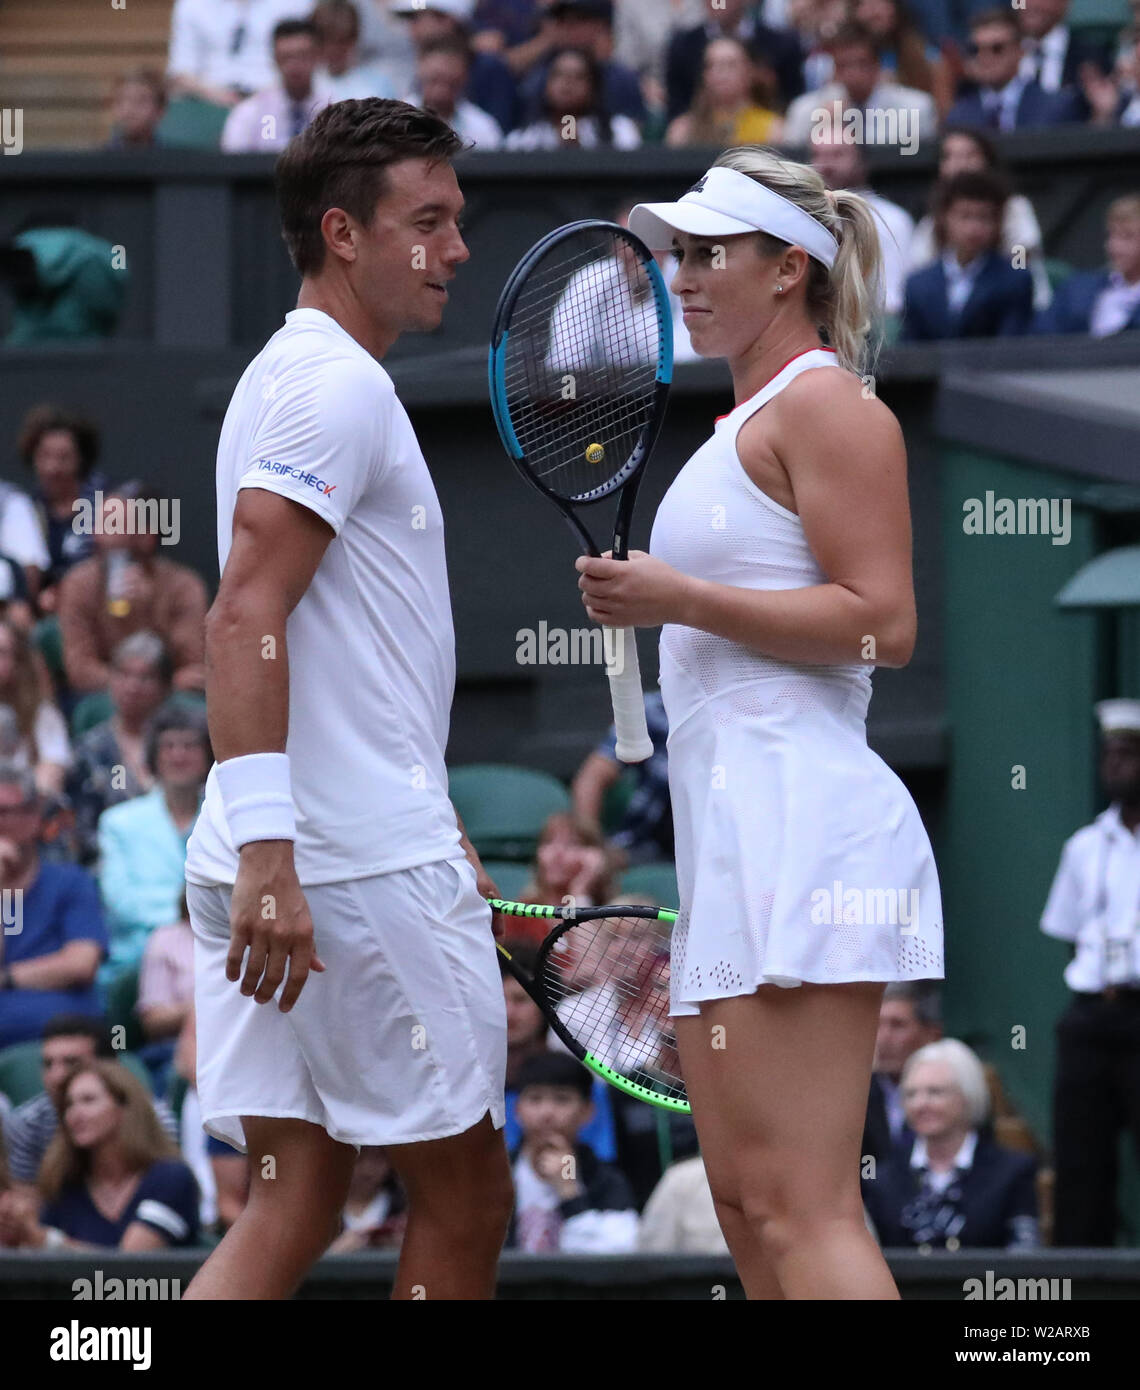 London, UK. 06th July, 2019. Andreas Mies and Alexa Guarachi in mixed  doubles against Andy Murray and Serena Williams on Day Six at The Wimbledon  Championships tennis, Wimbledon, London on July 6,